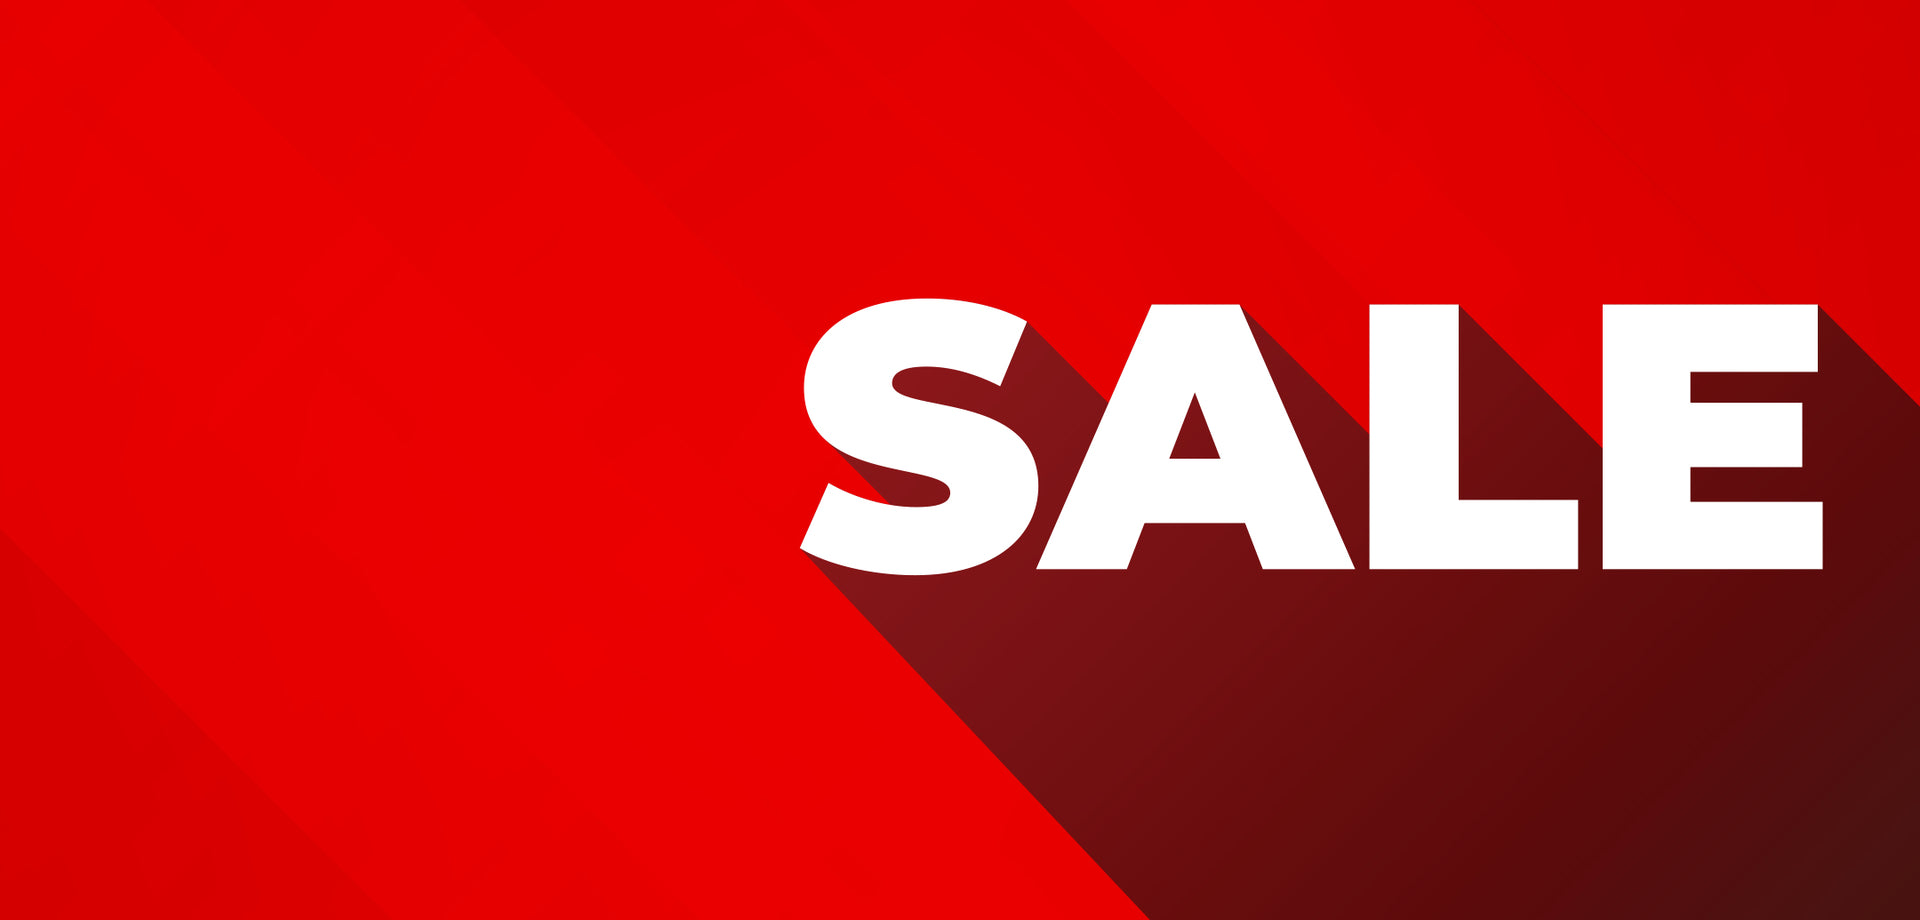 Different shades of red on the background with the word SALE in all caps.  